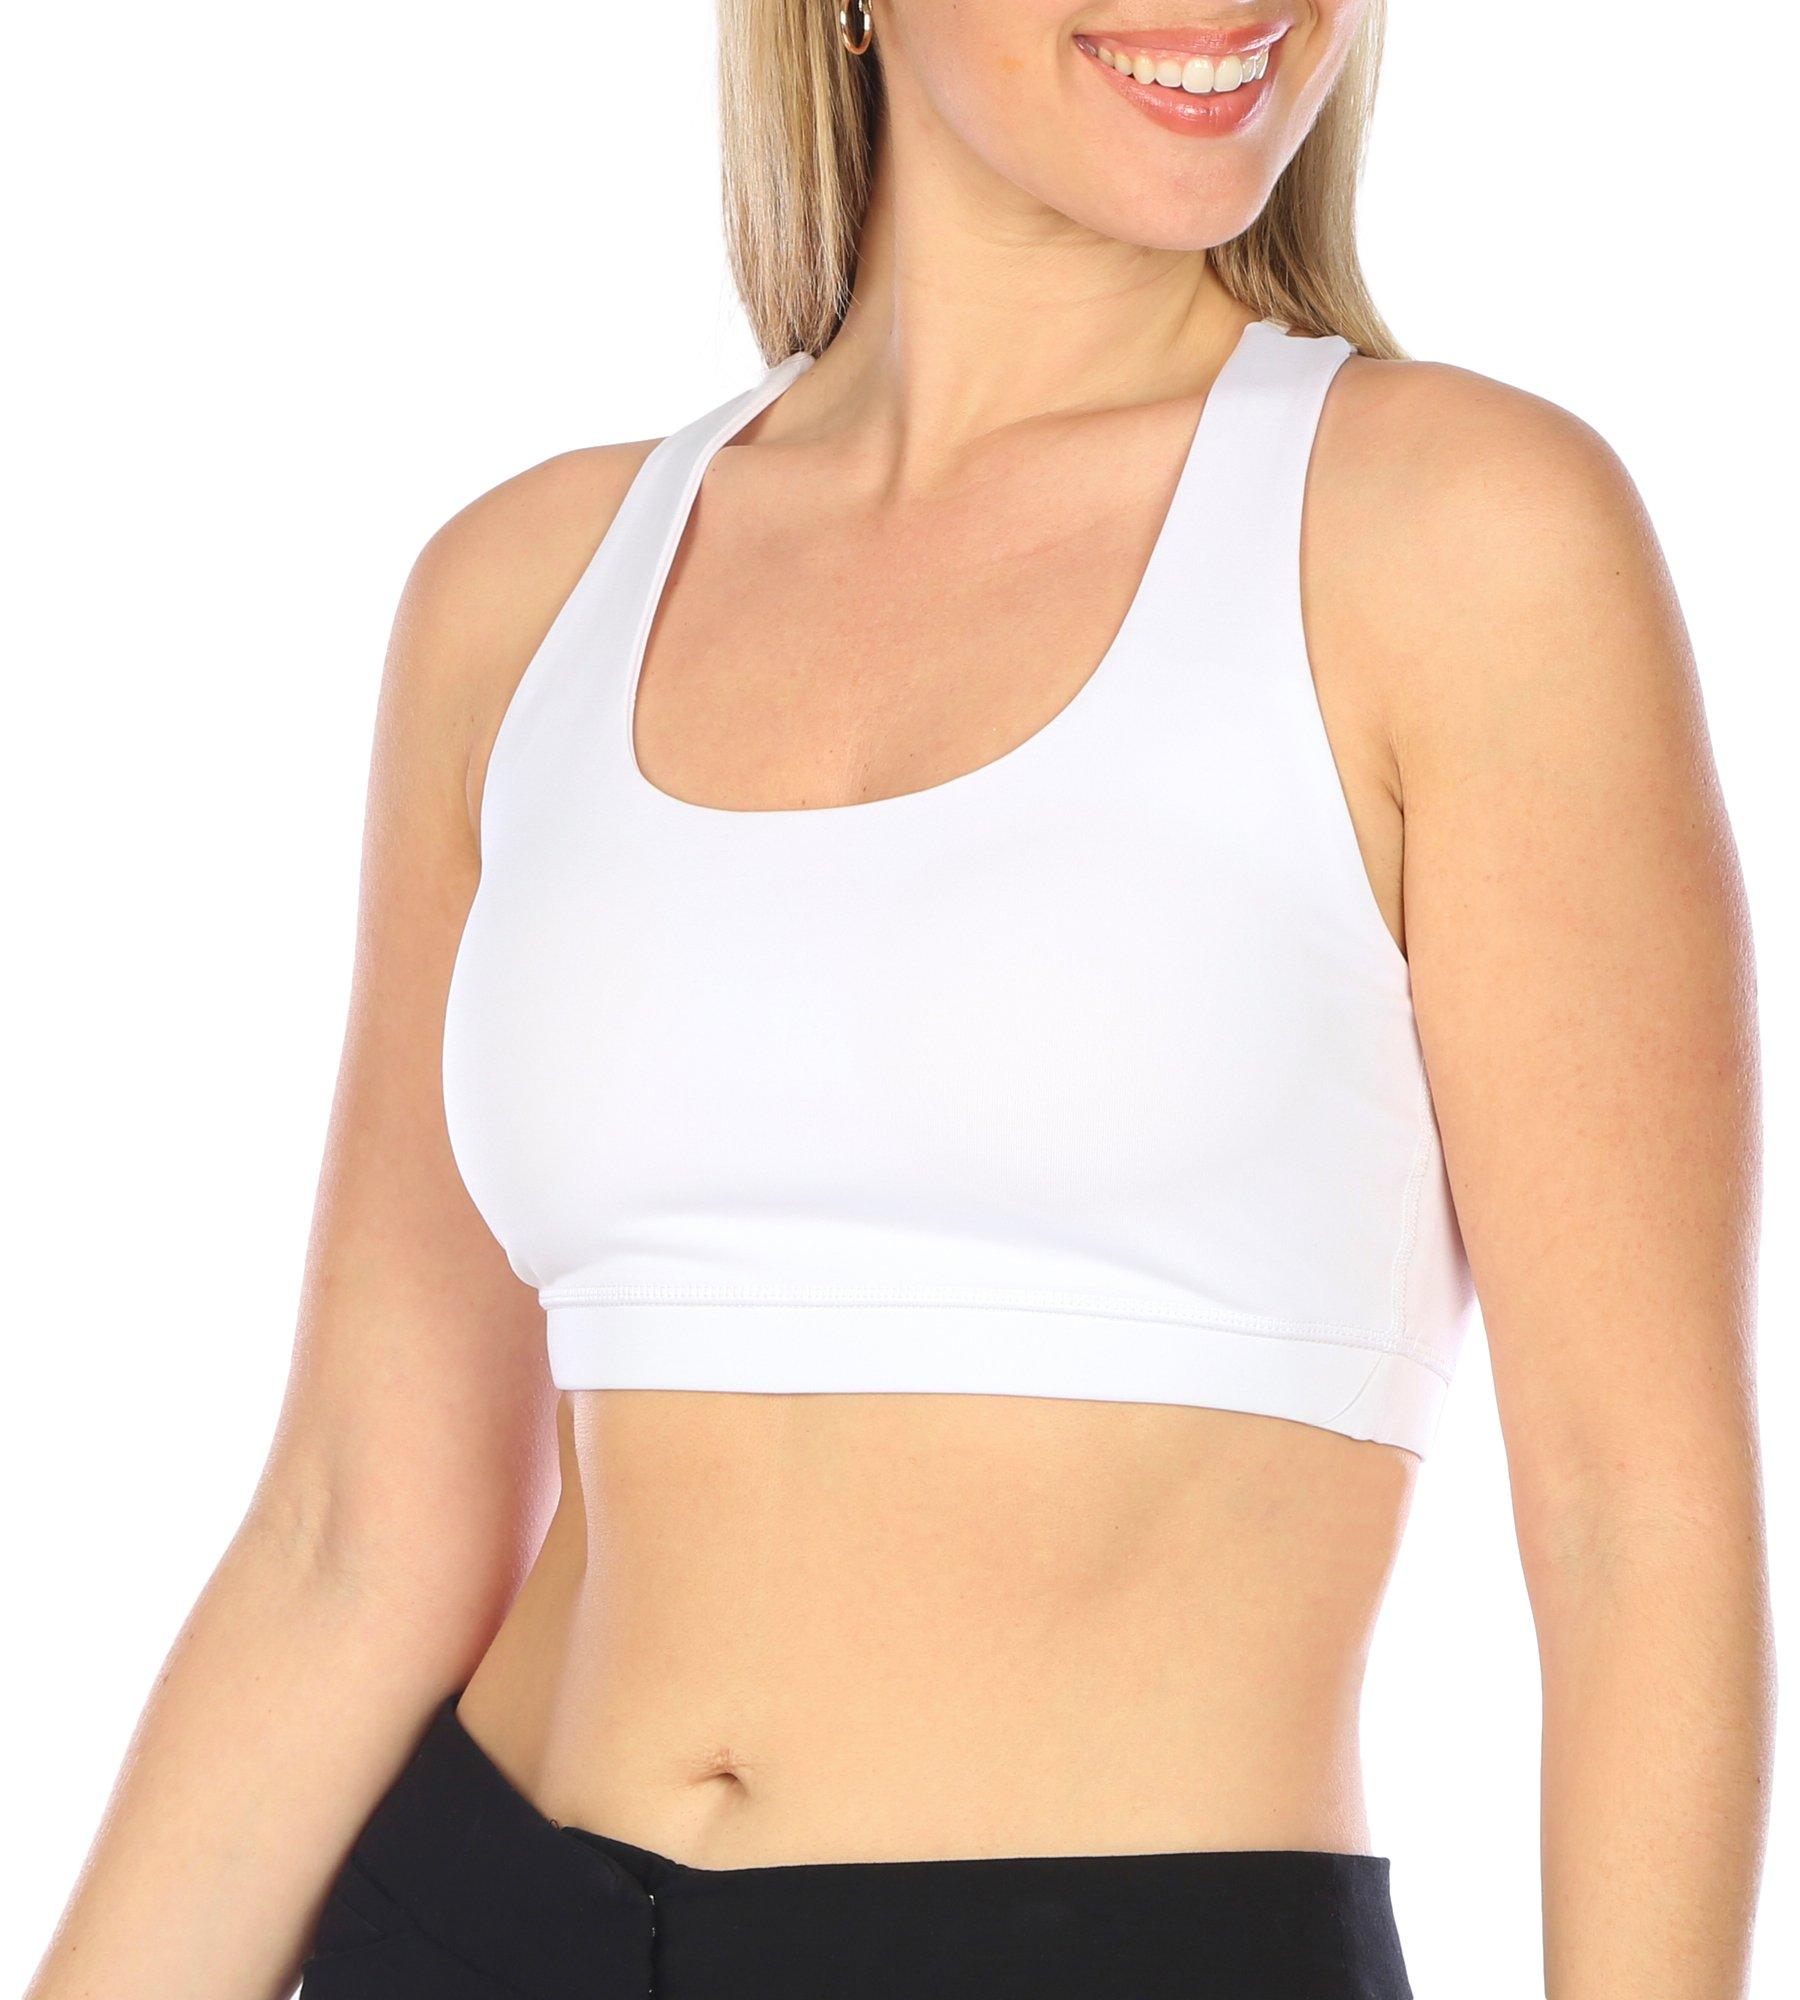 Champion, Absolute, Moisture Wicking, High-Impact Sports Bra for Women,  White, Small